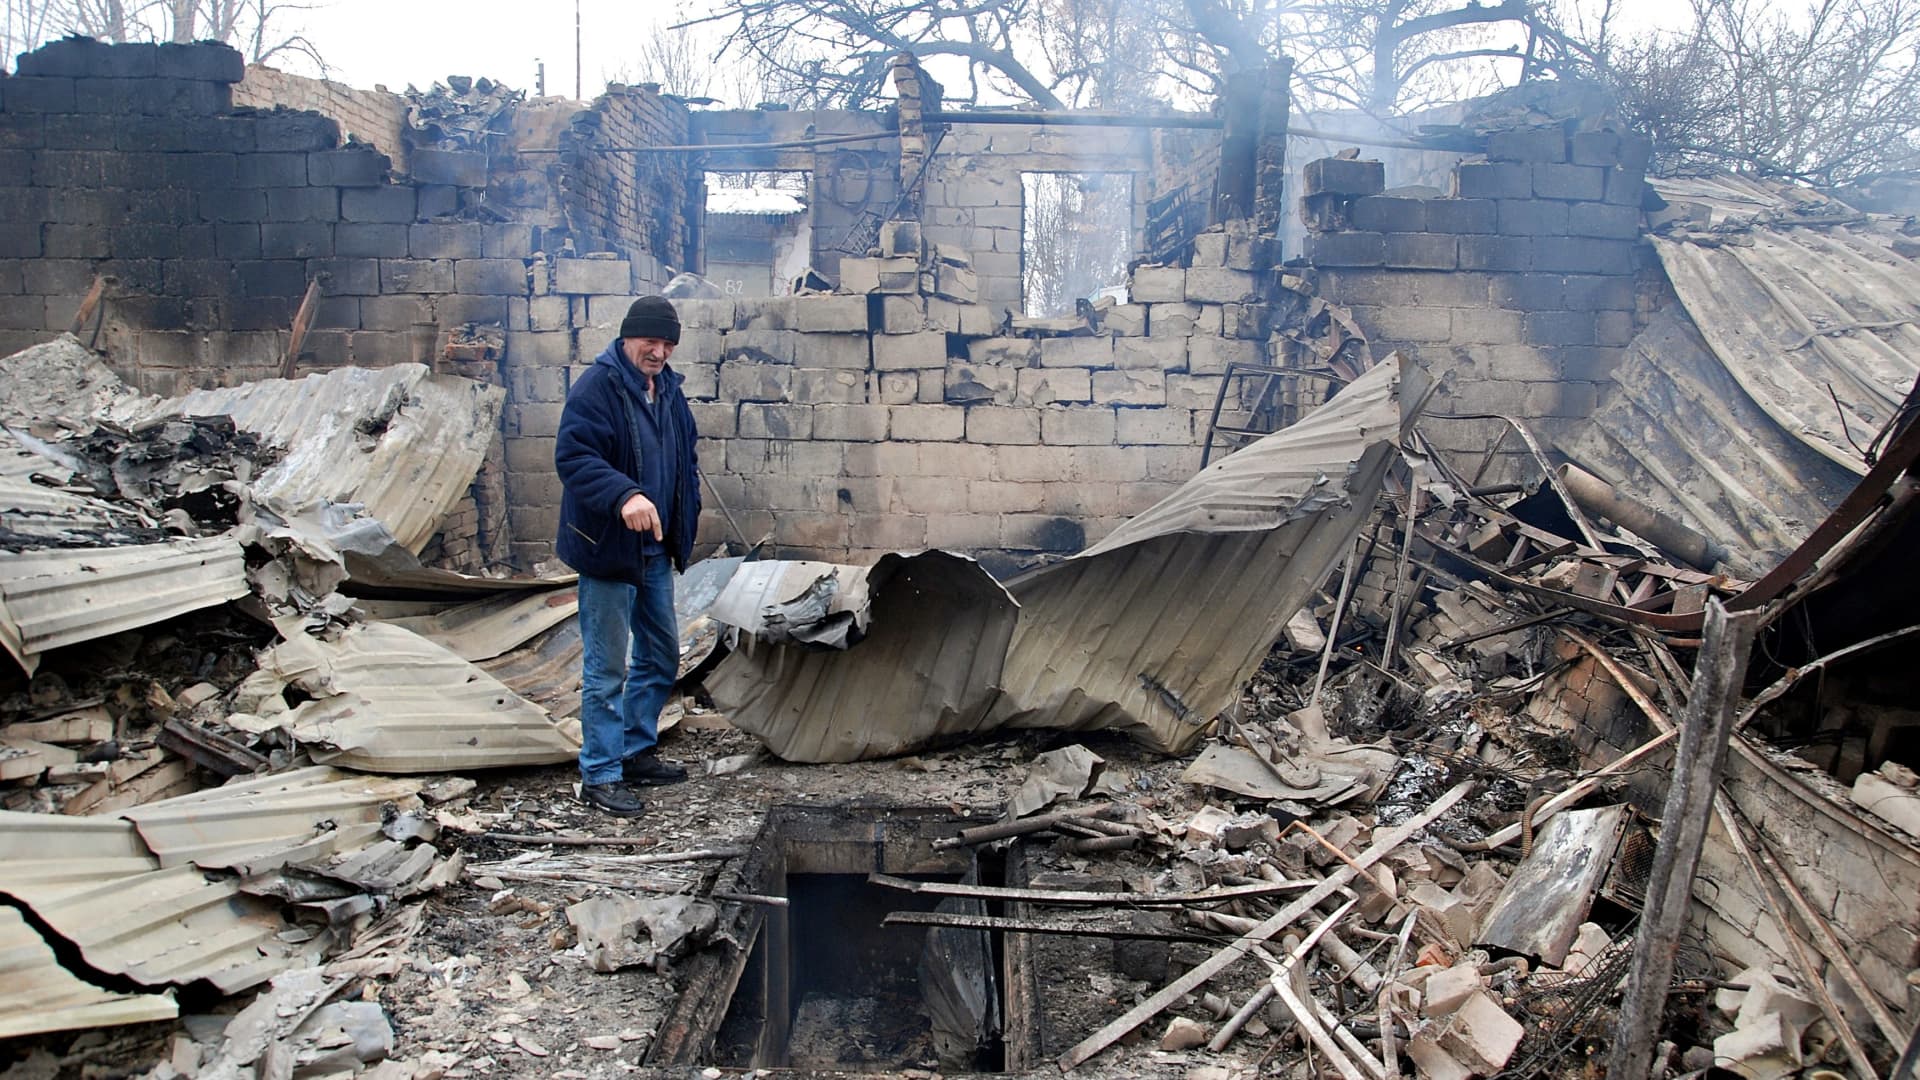 A man stands on the rubble of a house destroyed by recent shelling during Ukraine-Russia conflict in Kharkiv, Ukraine March 7, 2022.